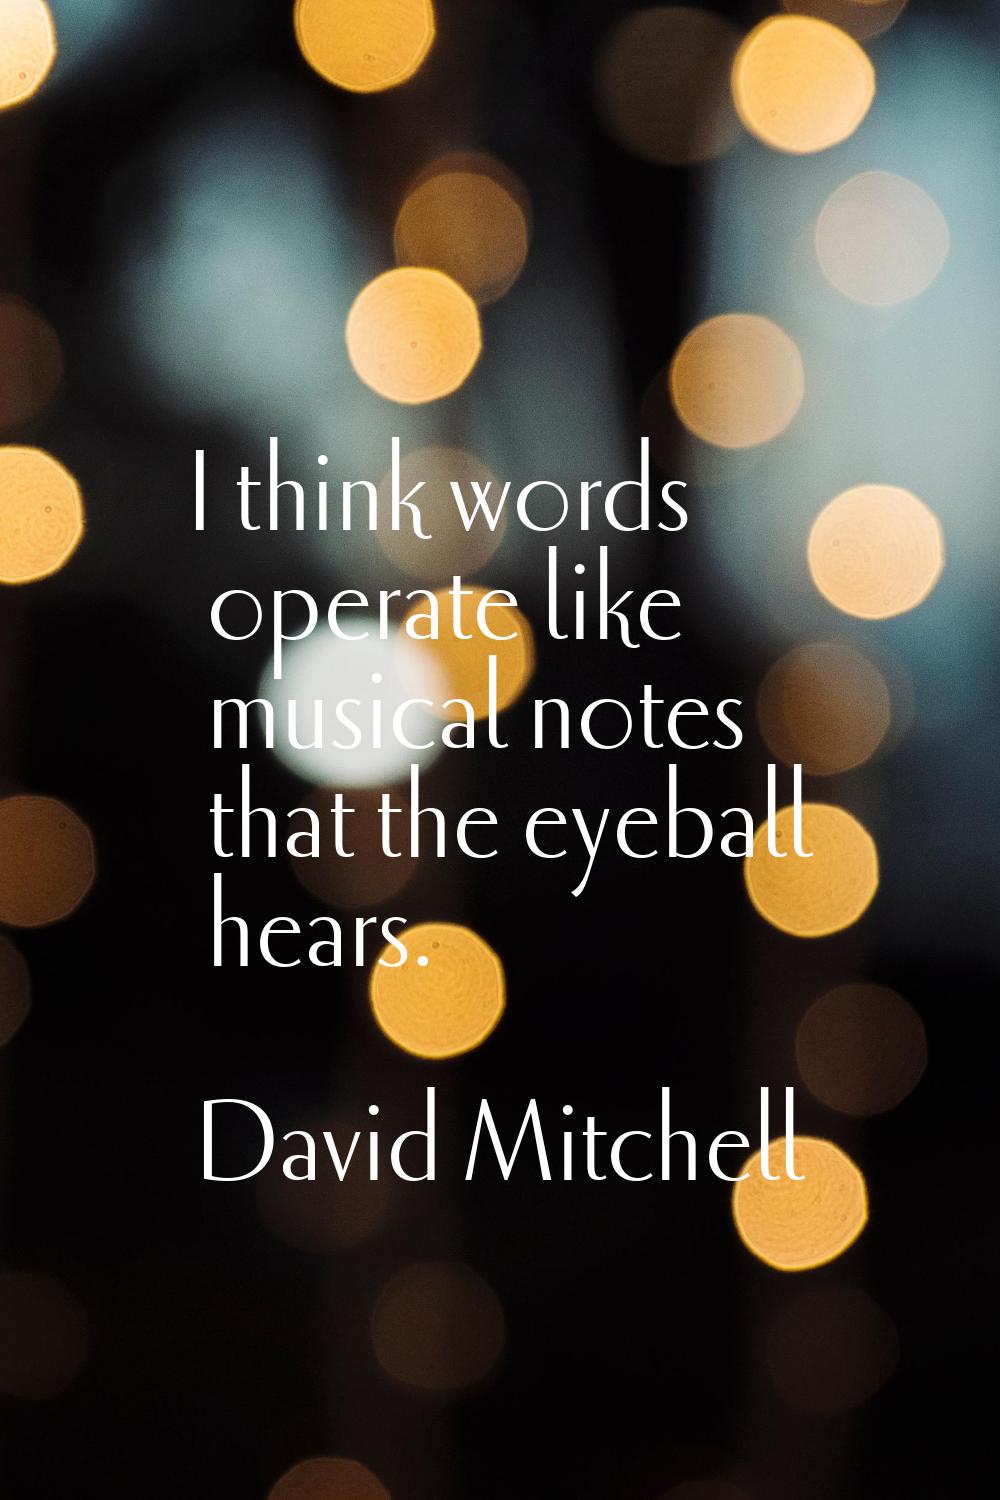 I think words operate like musical notes that the eyeball hears.